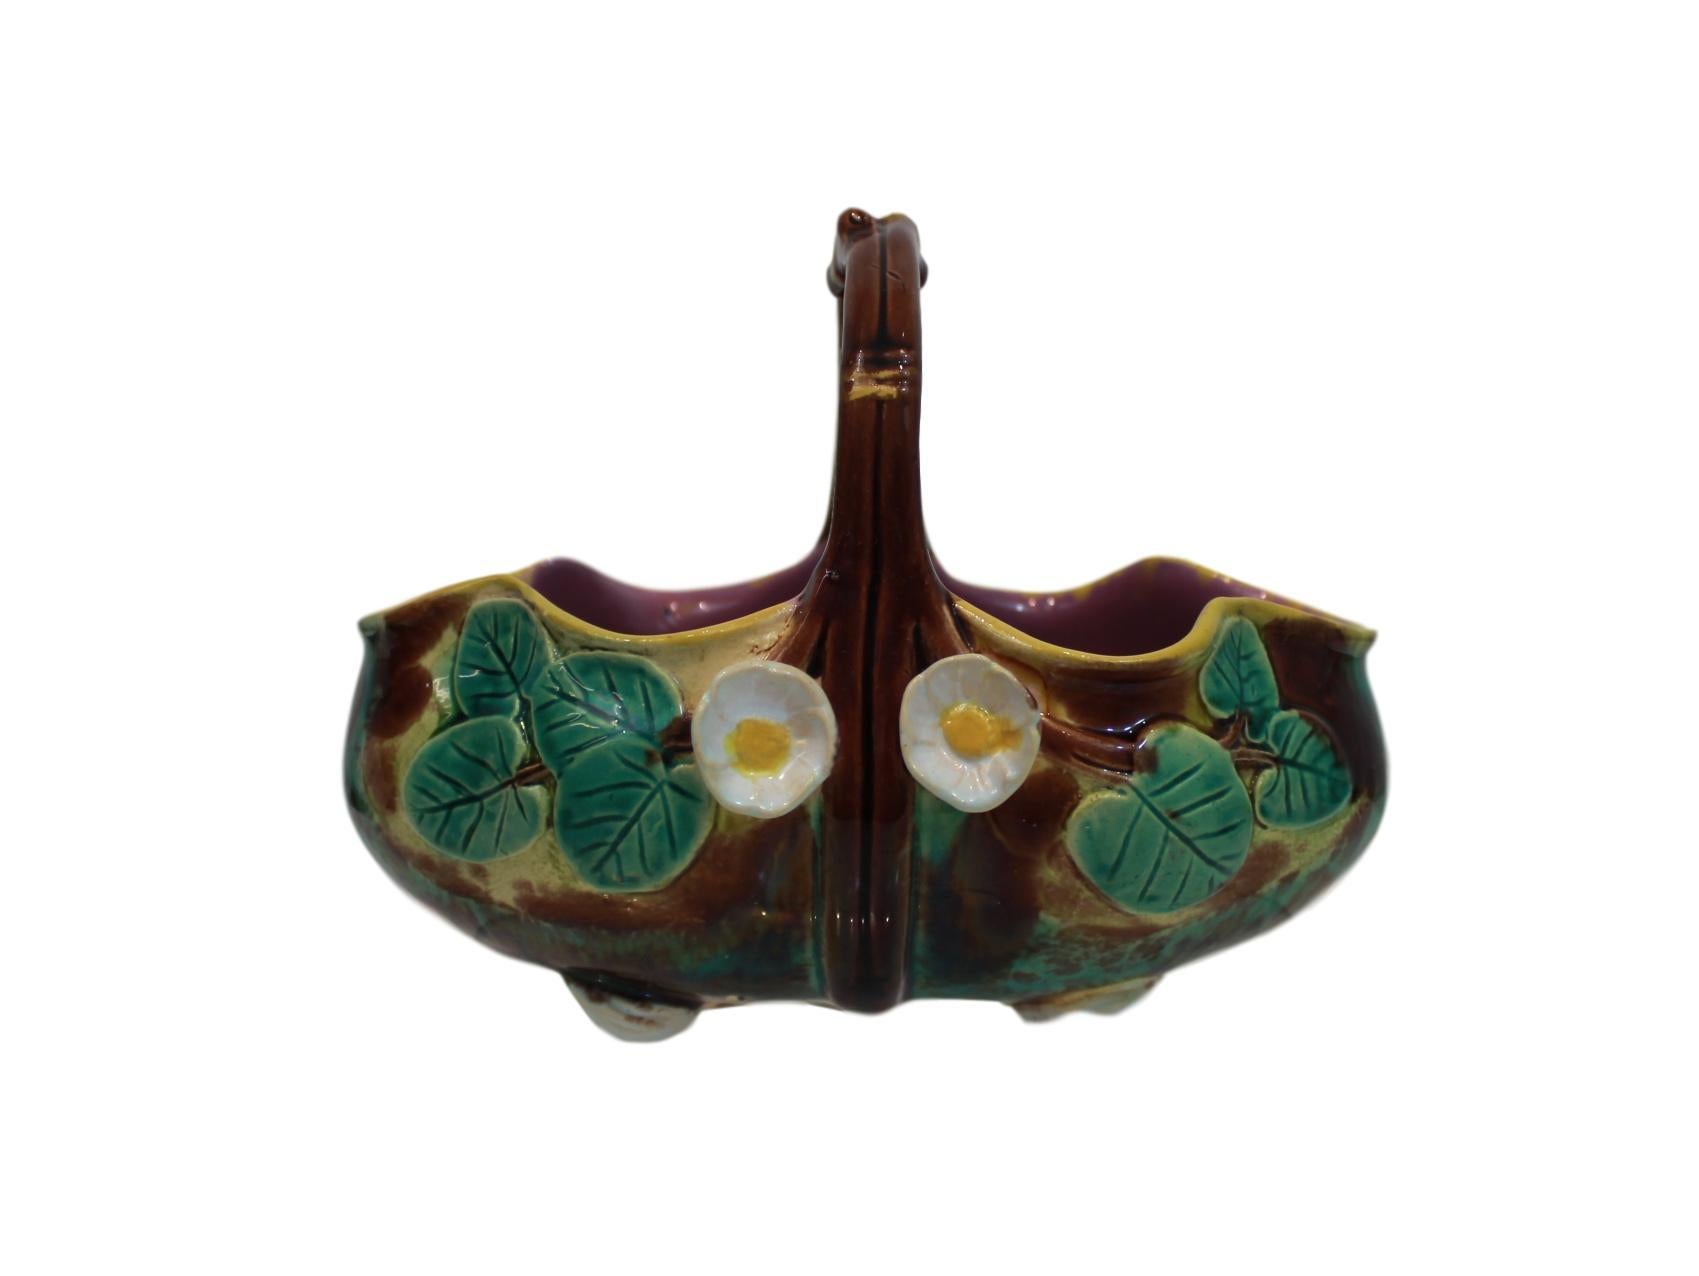 Holdcroft Majolica pond lily basket, English, circa 1875, on a mottled green, brown and yellow ground, with green glazed leaves and two applied blossoms to each side, with twig-form handle, the interior glazed in pink.
Measurements: H 5.5 x W 4.5,